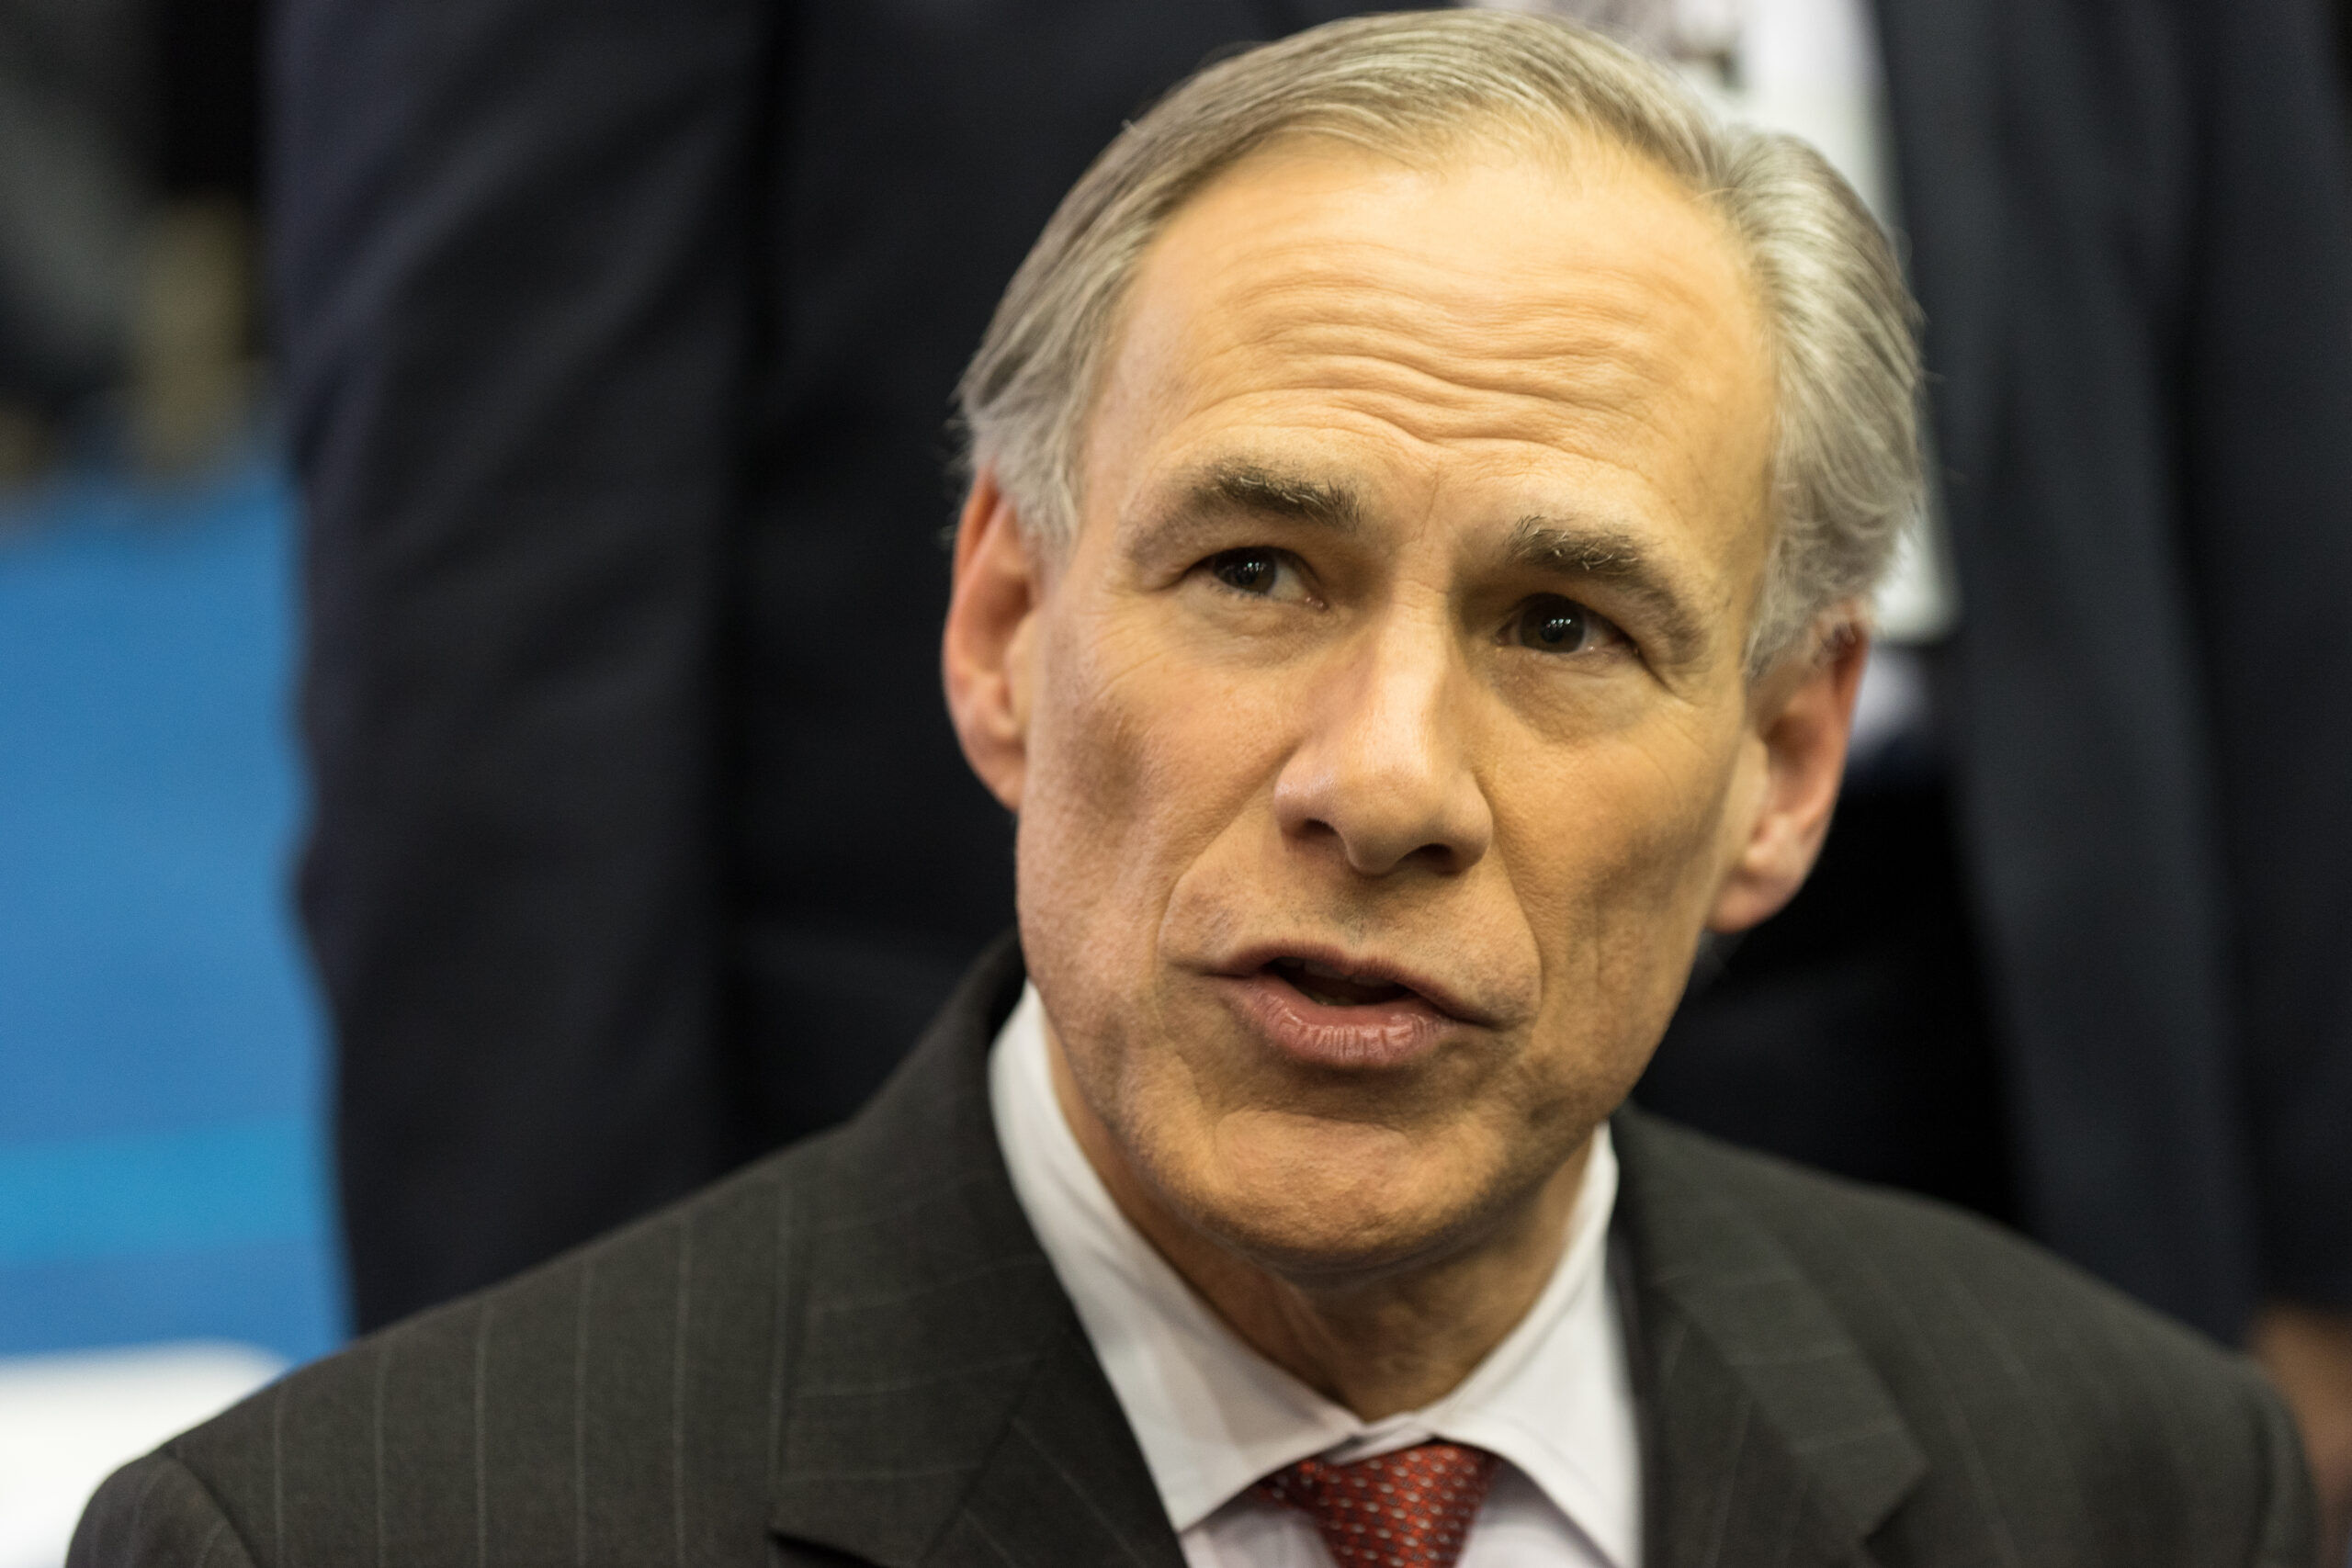 Texas Governor Greg Abbott speaks to the media before the 2016 Republican National Committee debate.